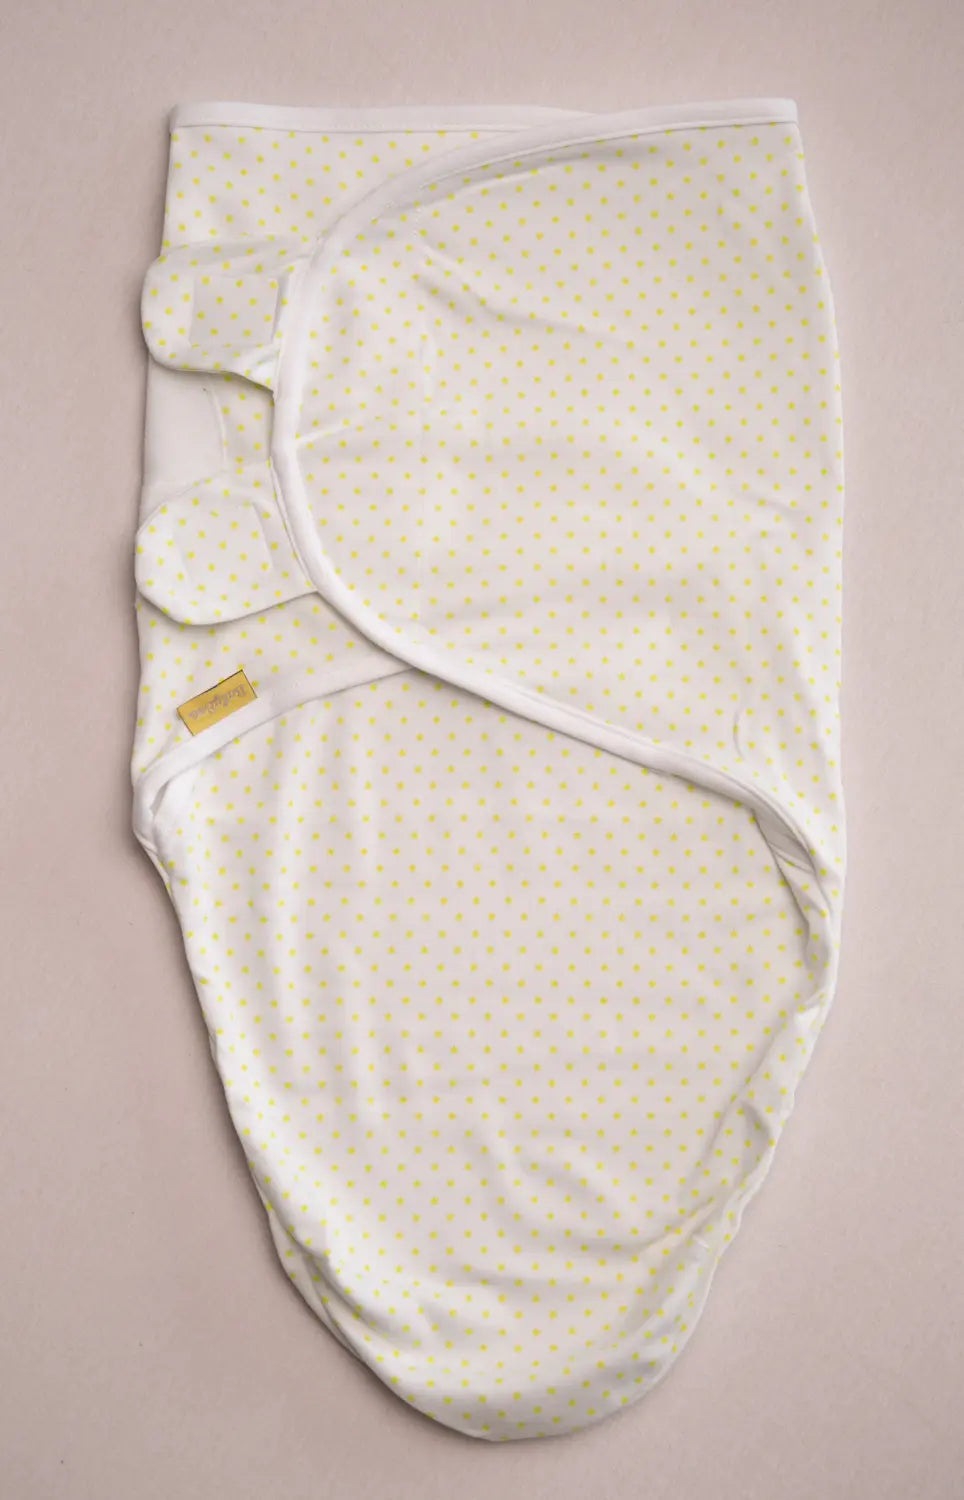 Babyboo Prewrapped Swaddle 1 Shaws Department Stores